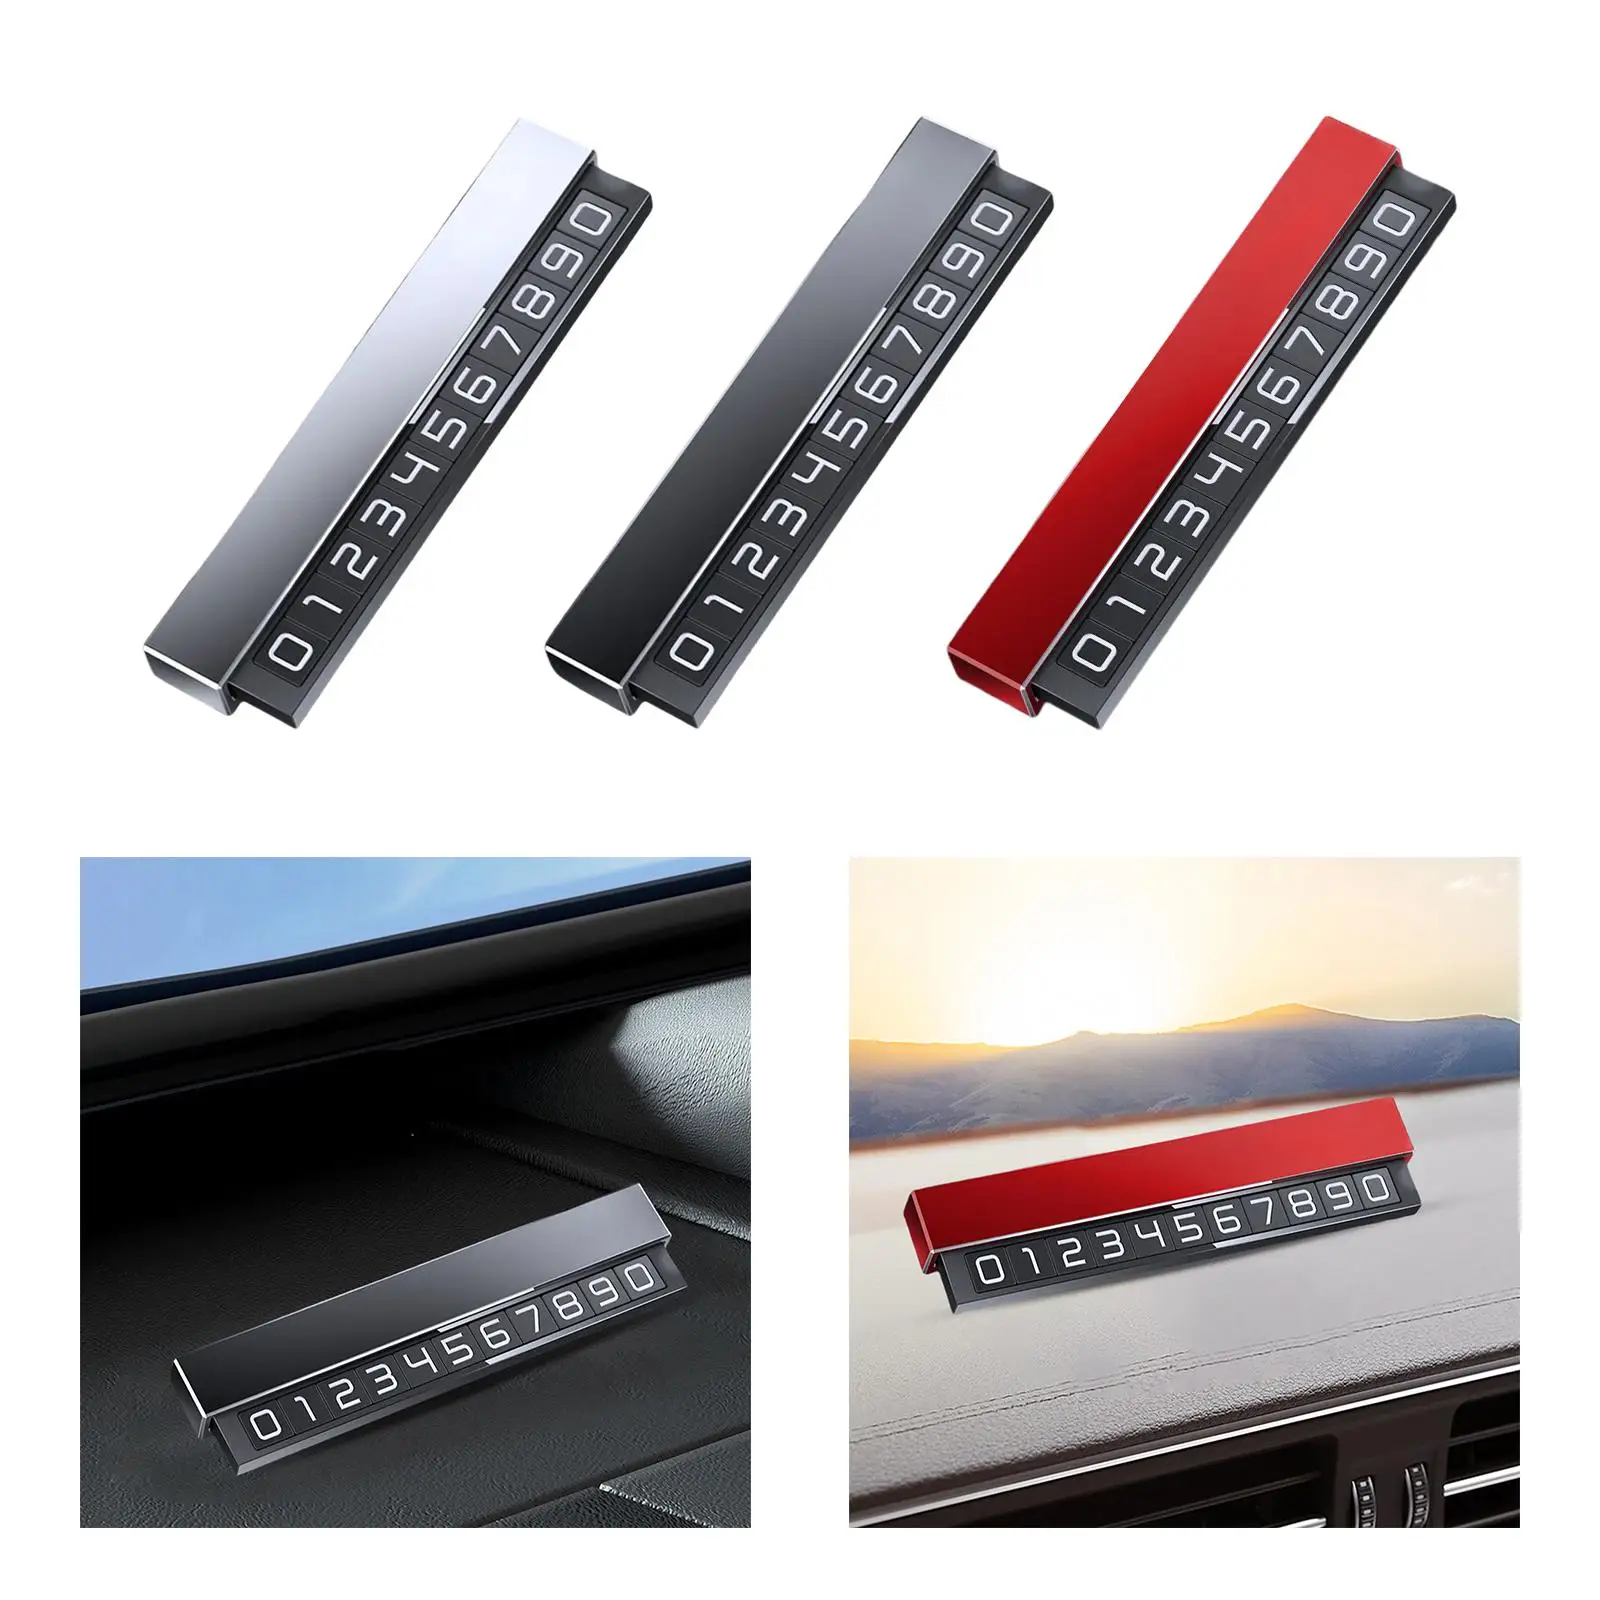 Car Temporary Parking Sign Aluminum Alloy Notification Phone Number Card for Parking